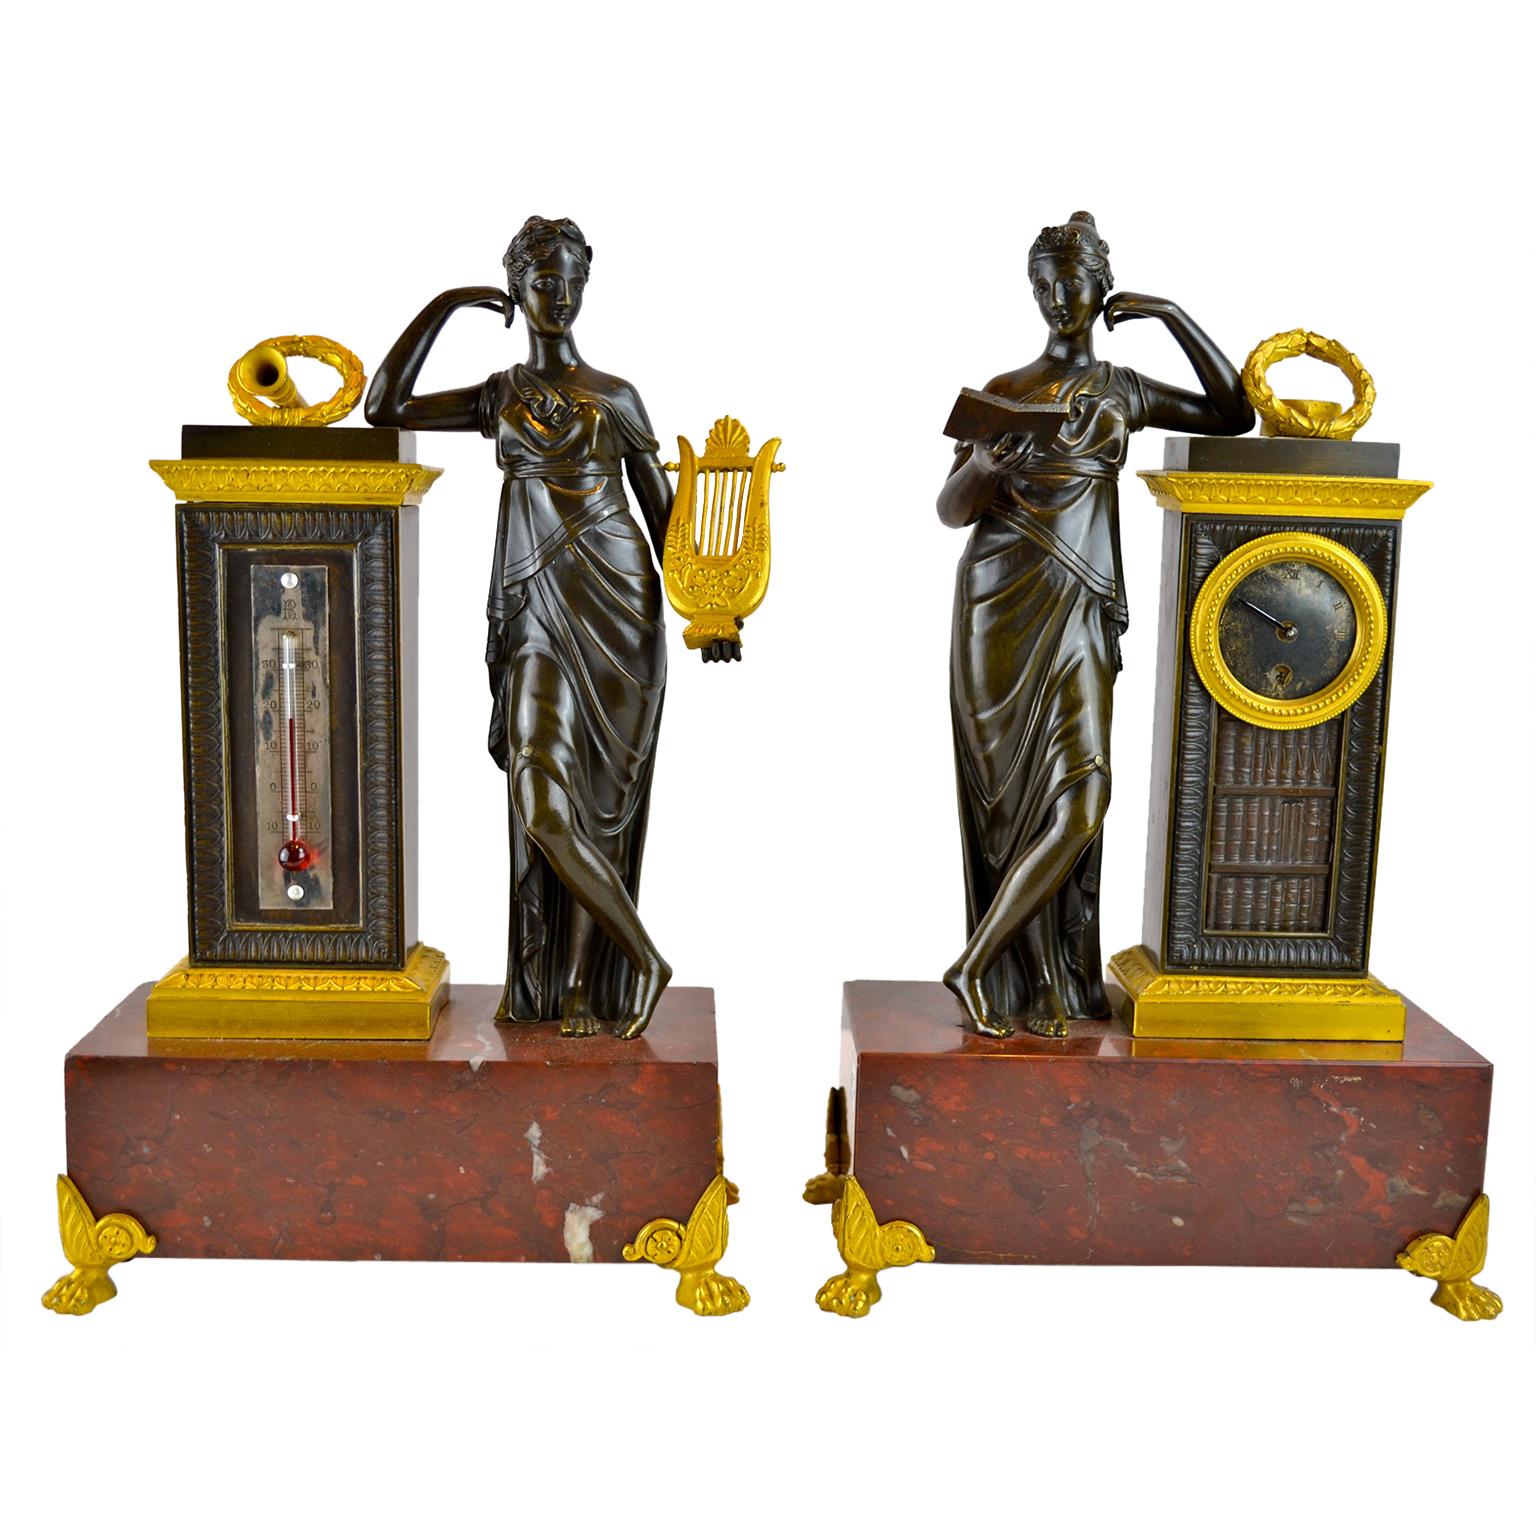 A rare pair of French Empire desk or table ornaments comprising a matching clock and barometer. Each features a classical maiden in patinated bronze standing beside the clock or barometer plinth, one holding a book, the other holding a gilded lyre;